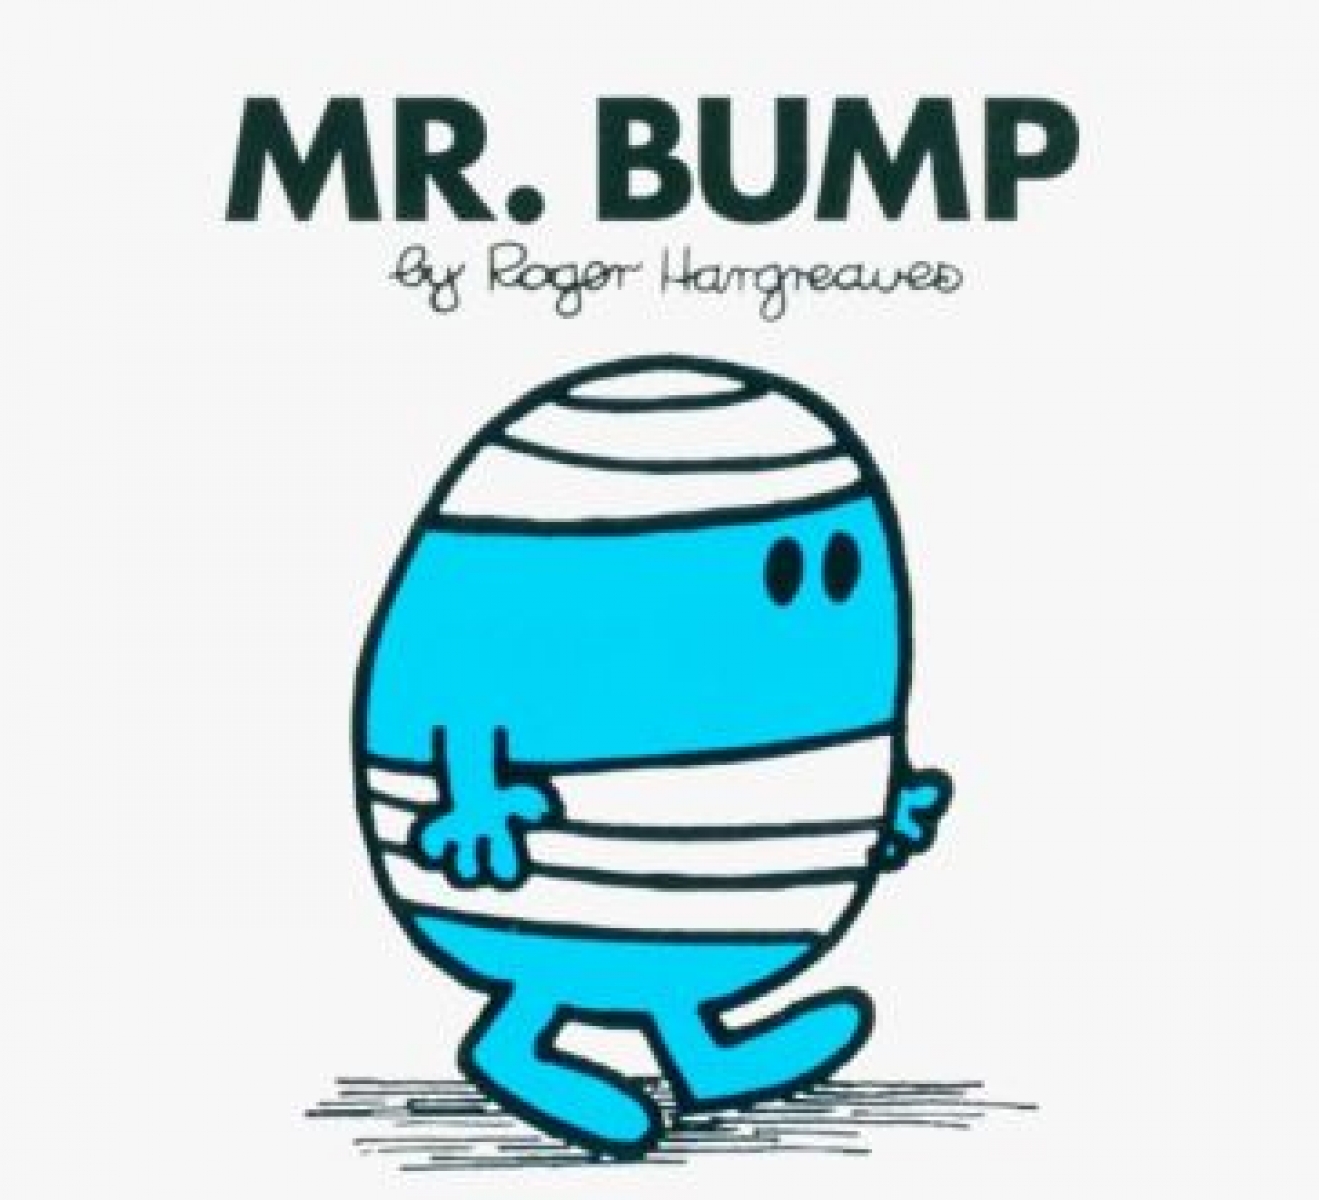 Hargreaves Roger Mr. Bump 